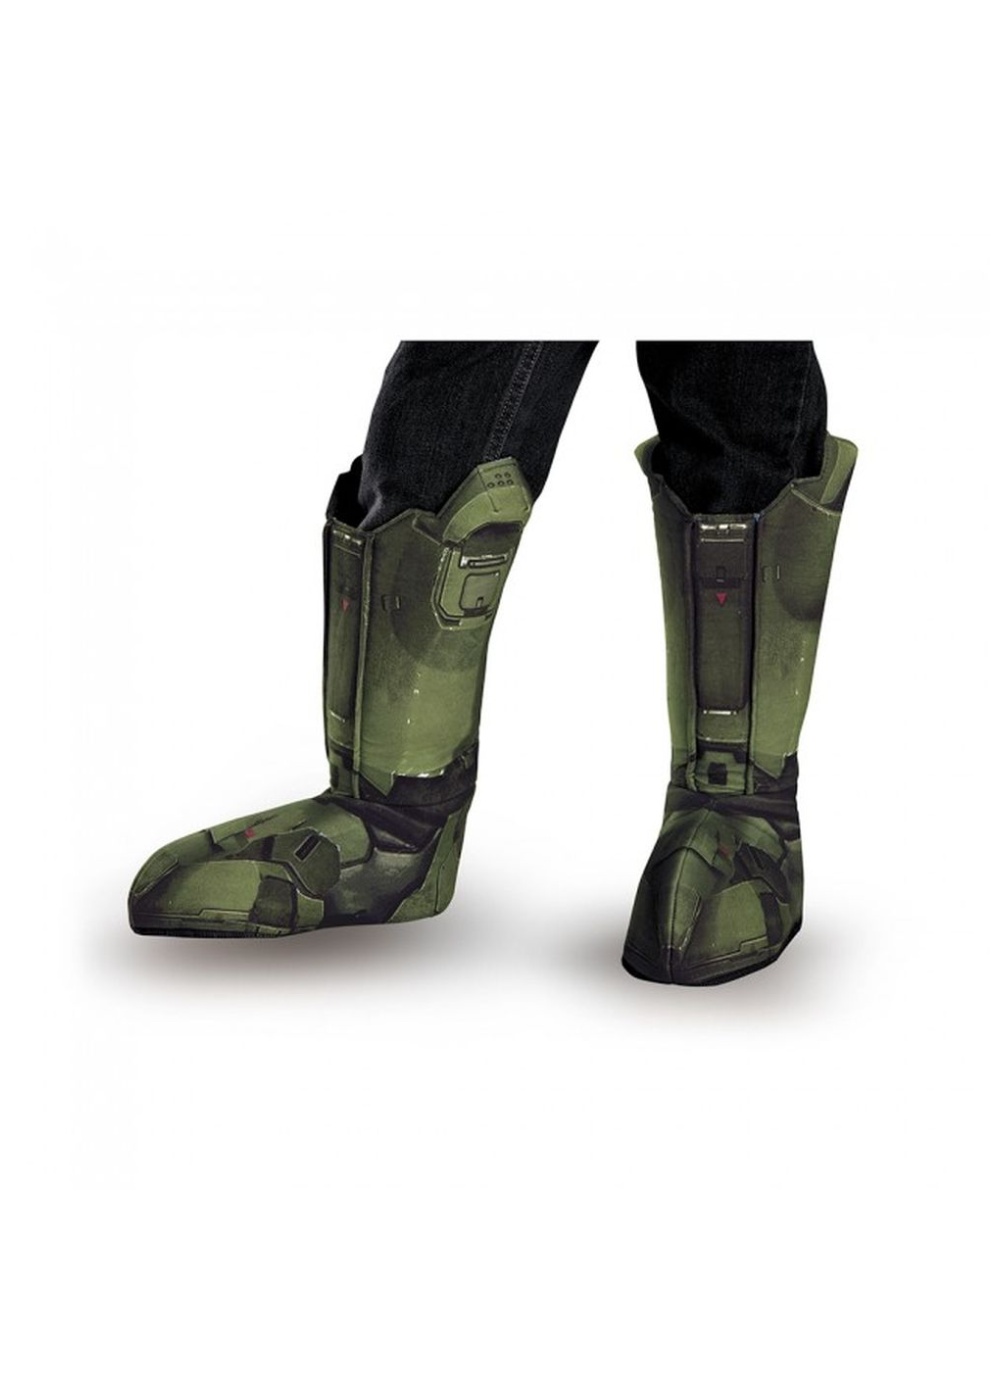  Boys Halo Boot Covers